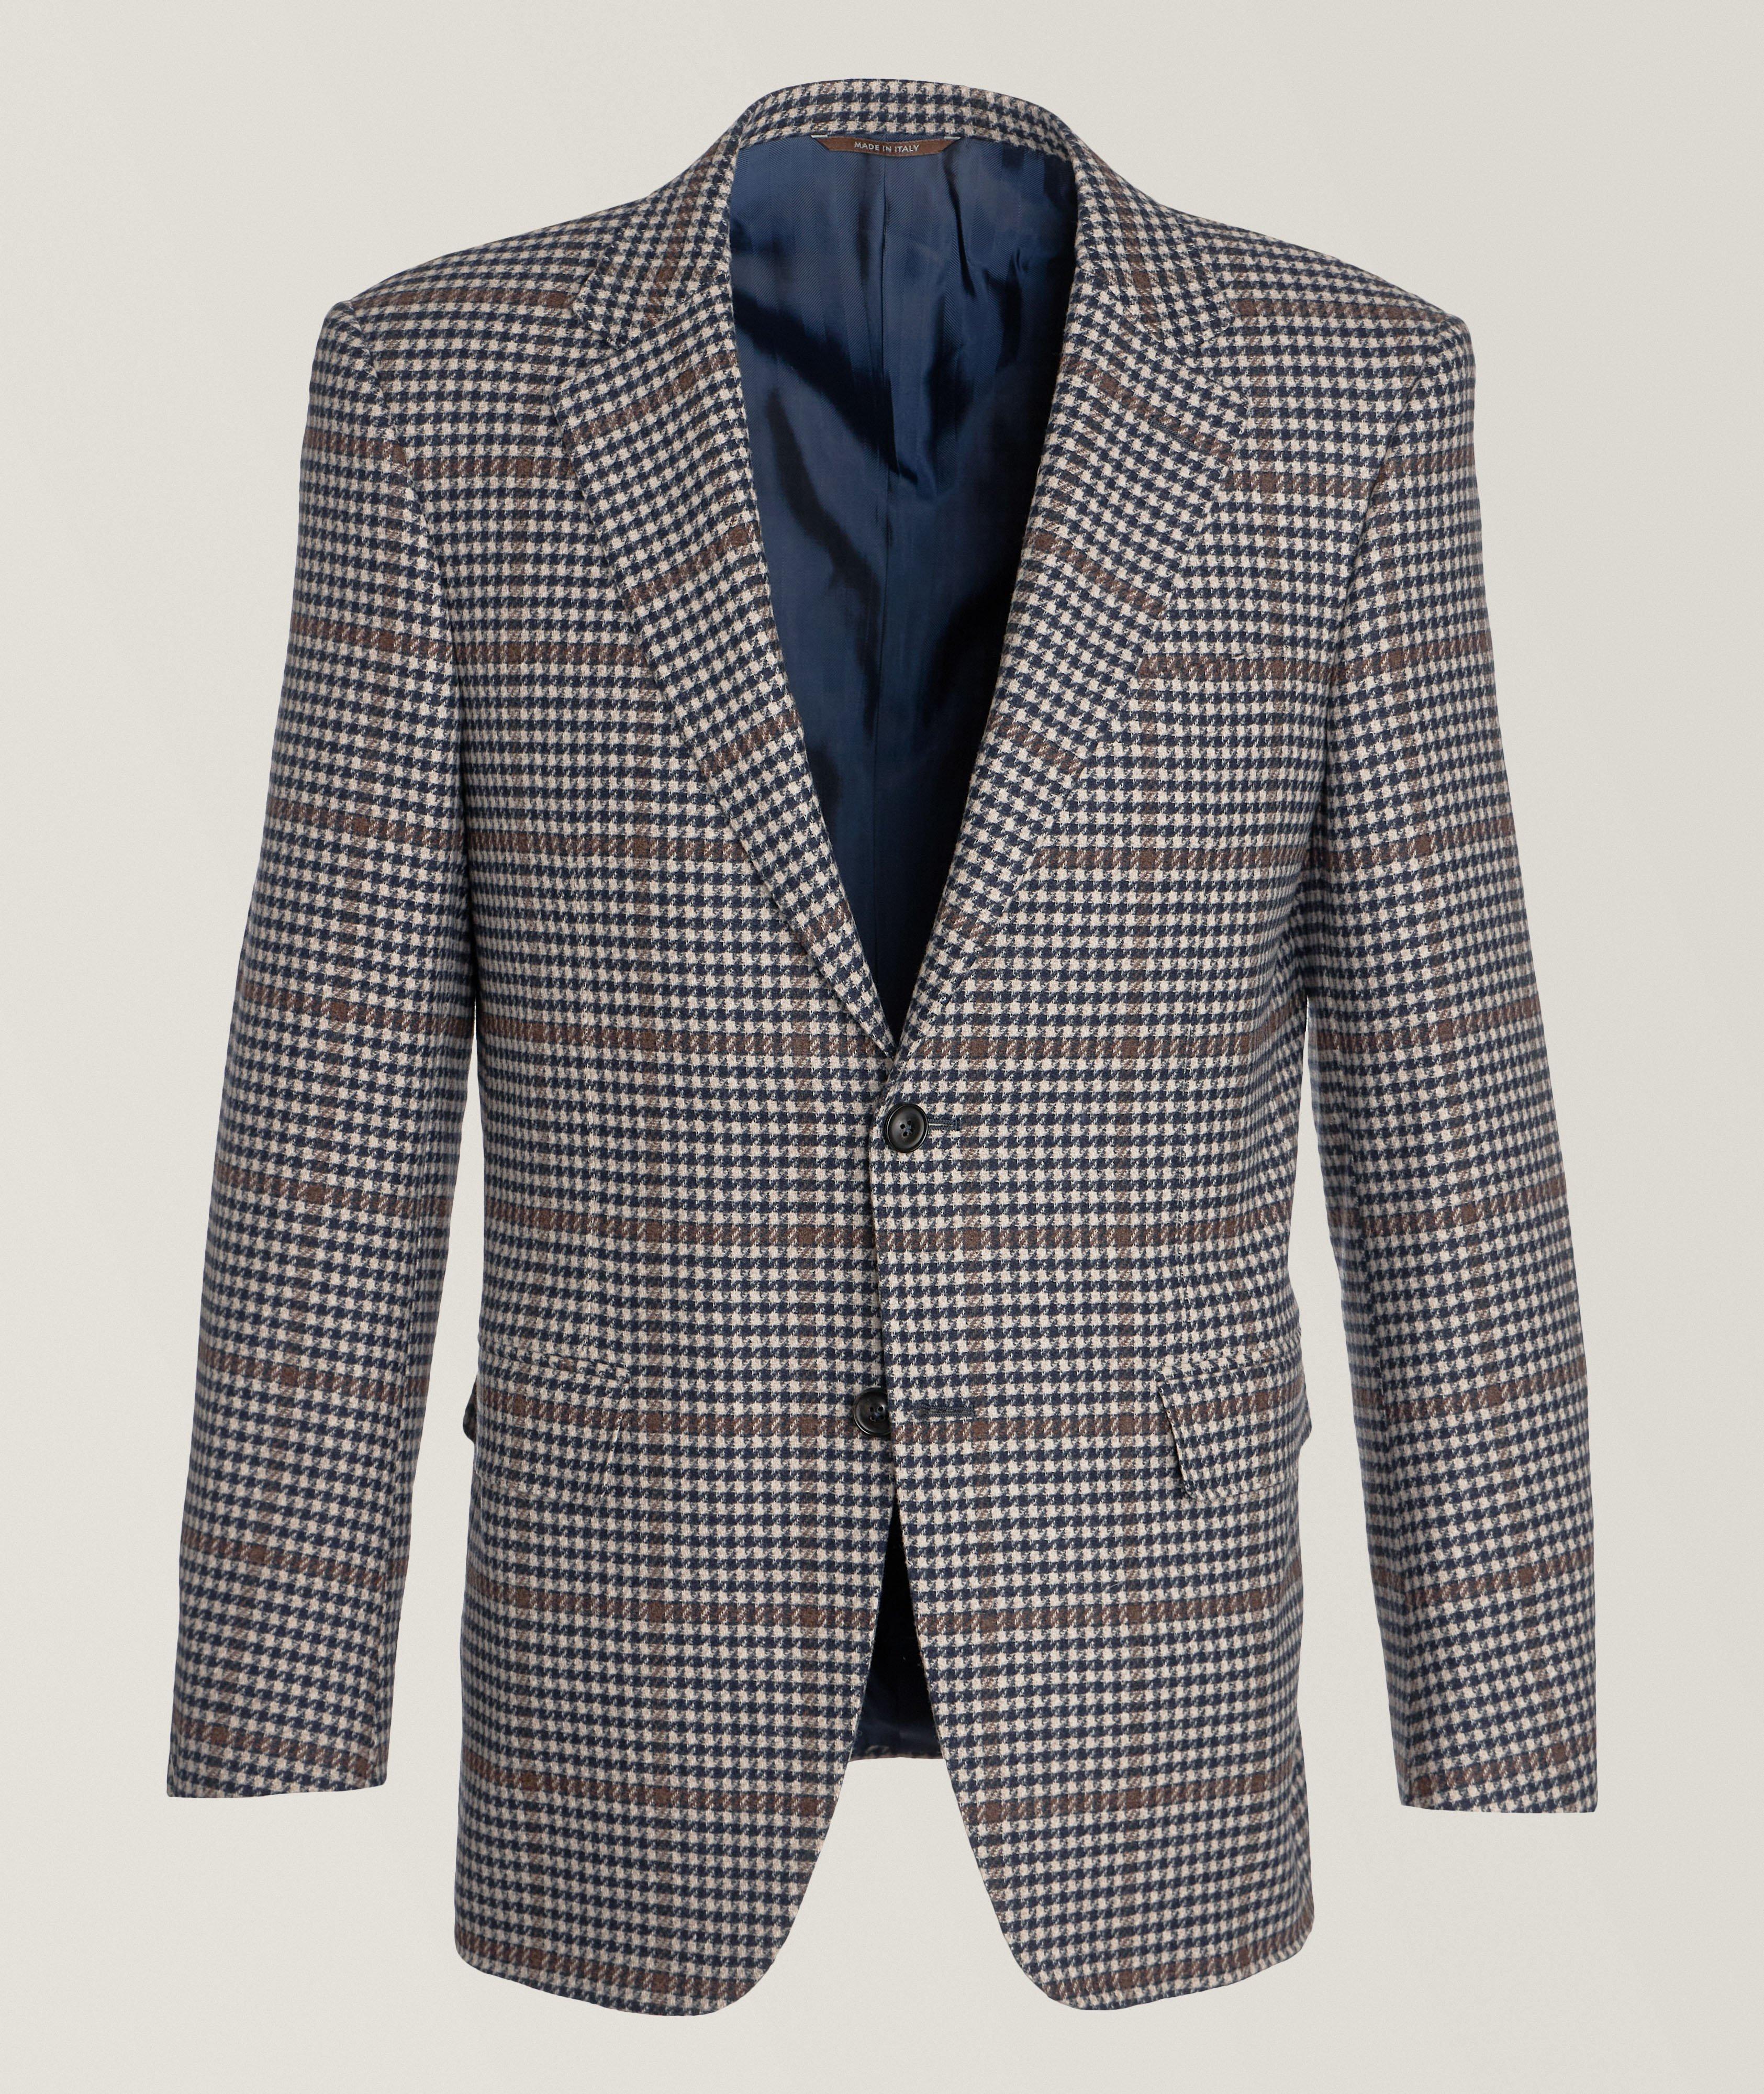 Houndstooth Check Wool-Cashmere Sport Jacket image 0